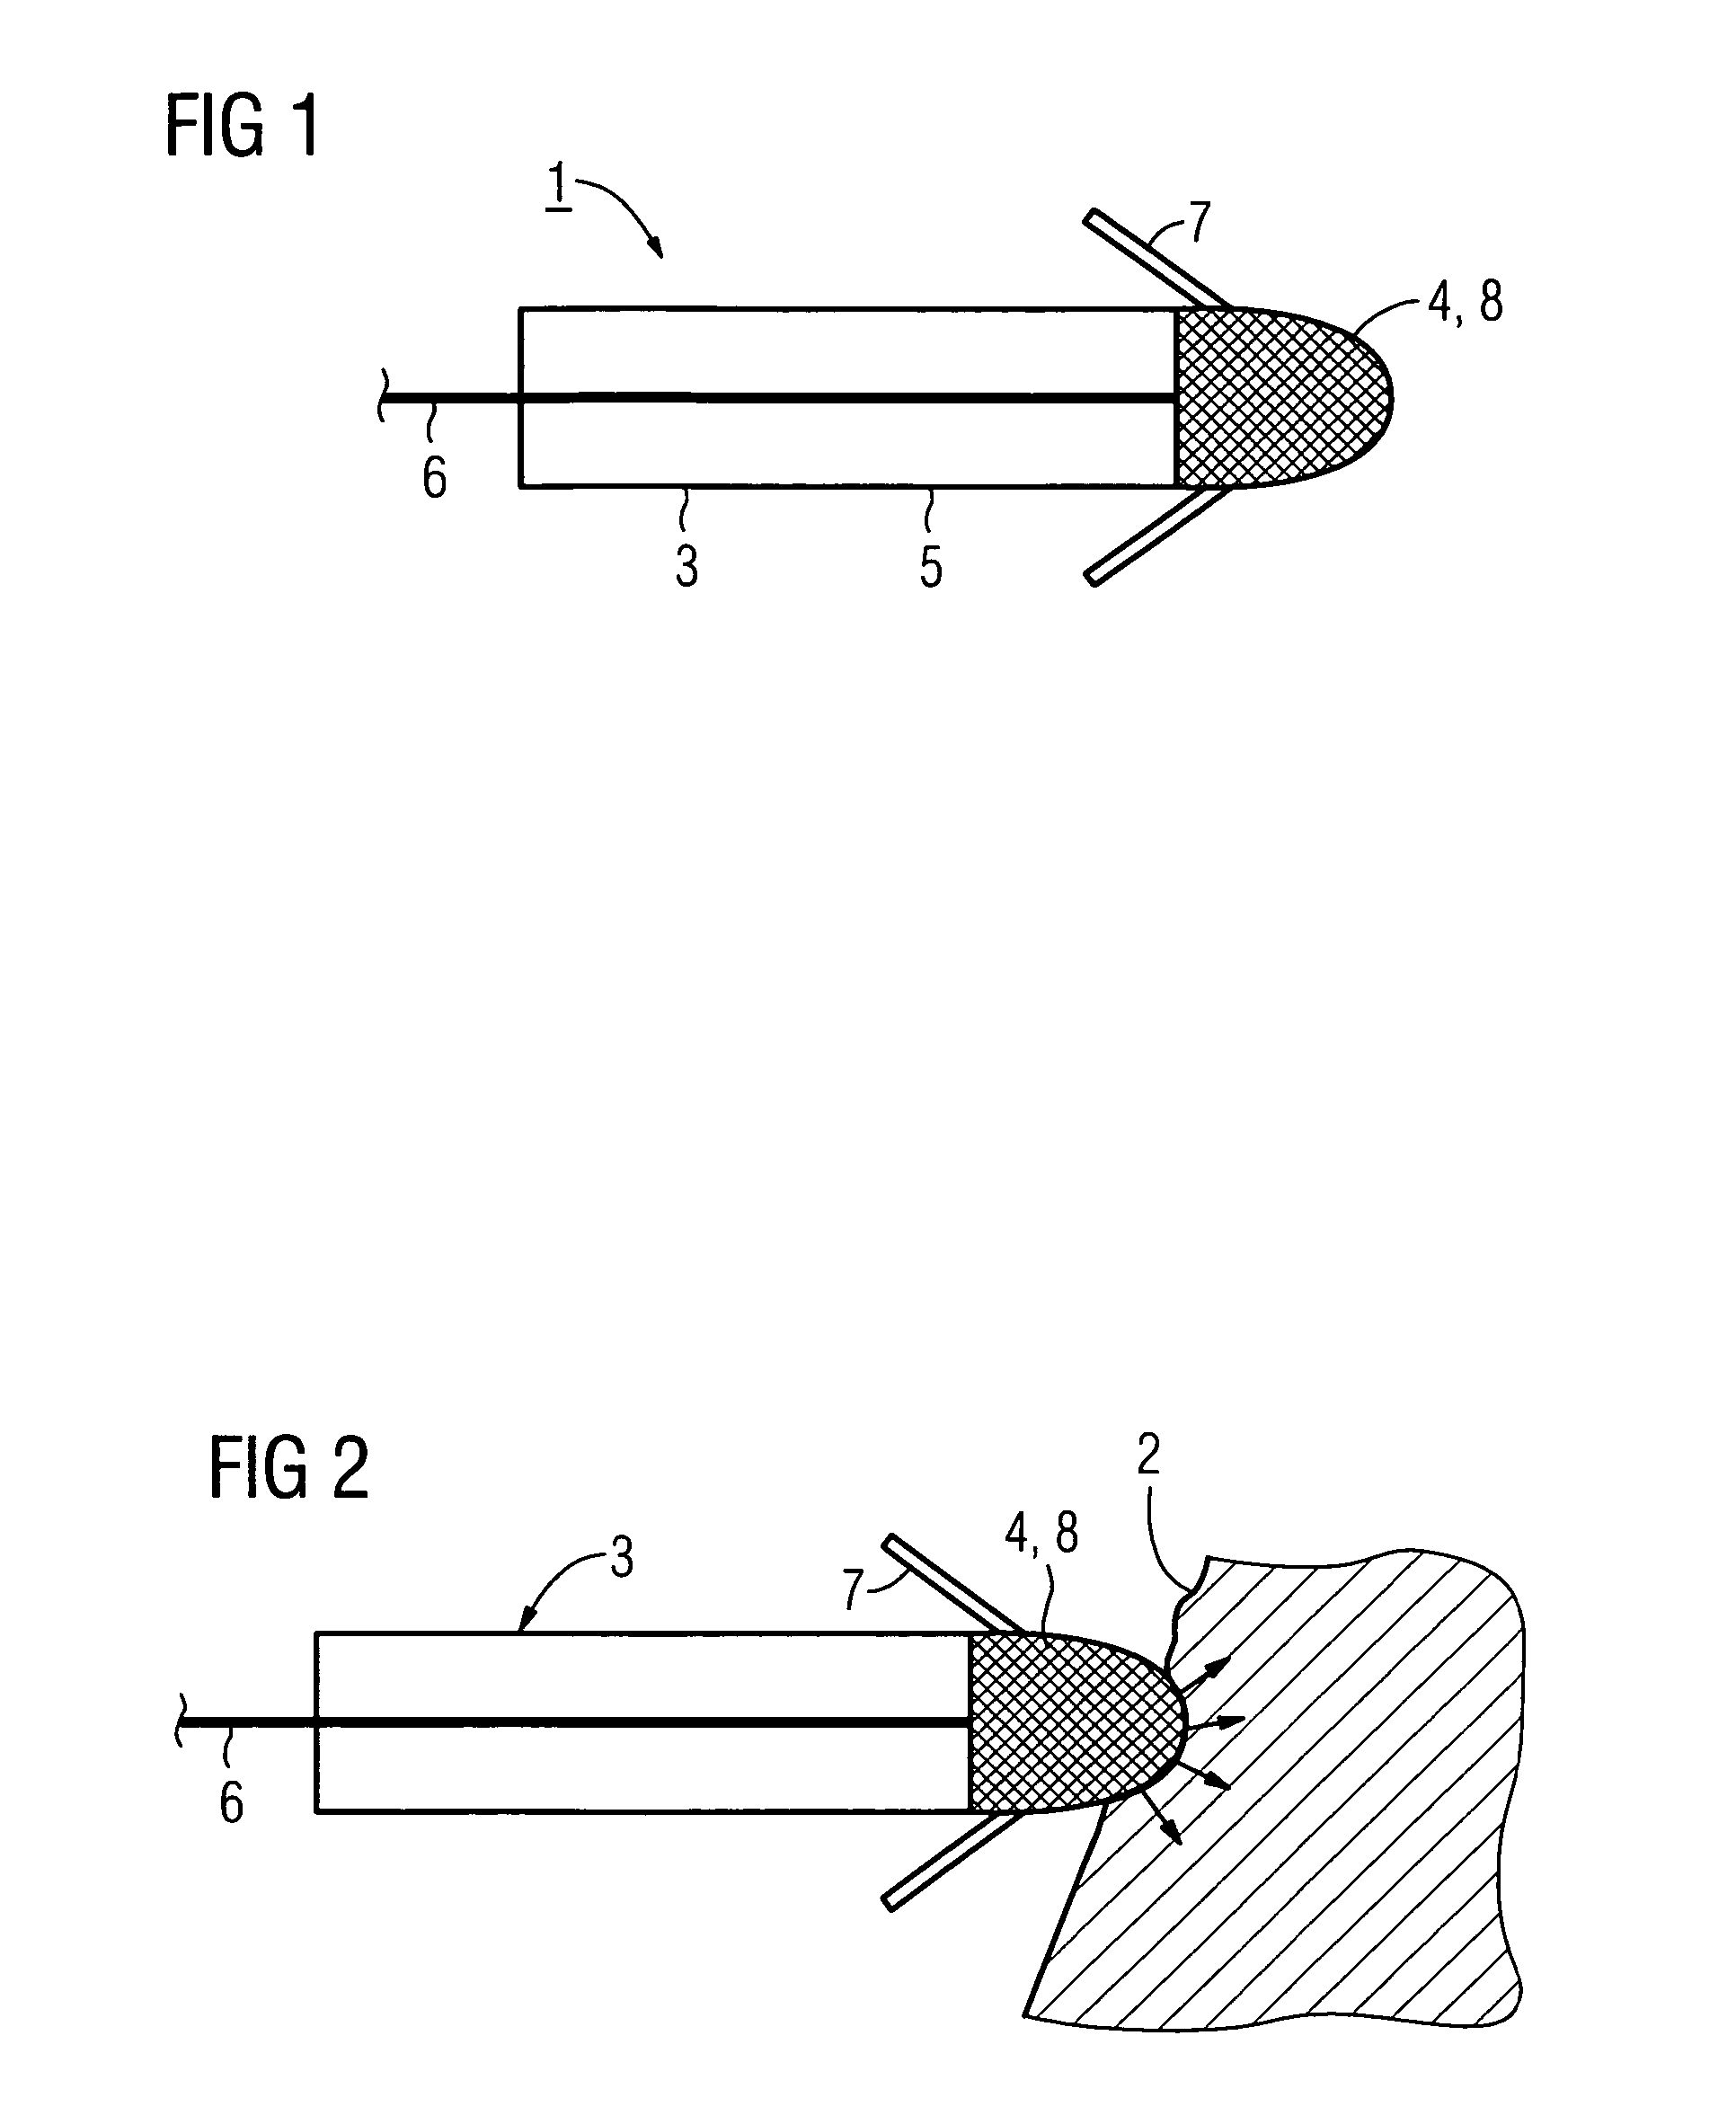 Intravenous pacemaker electrode